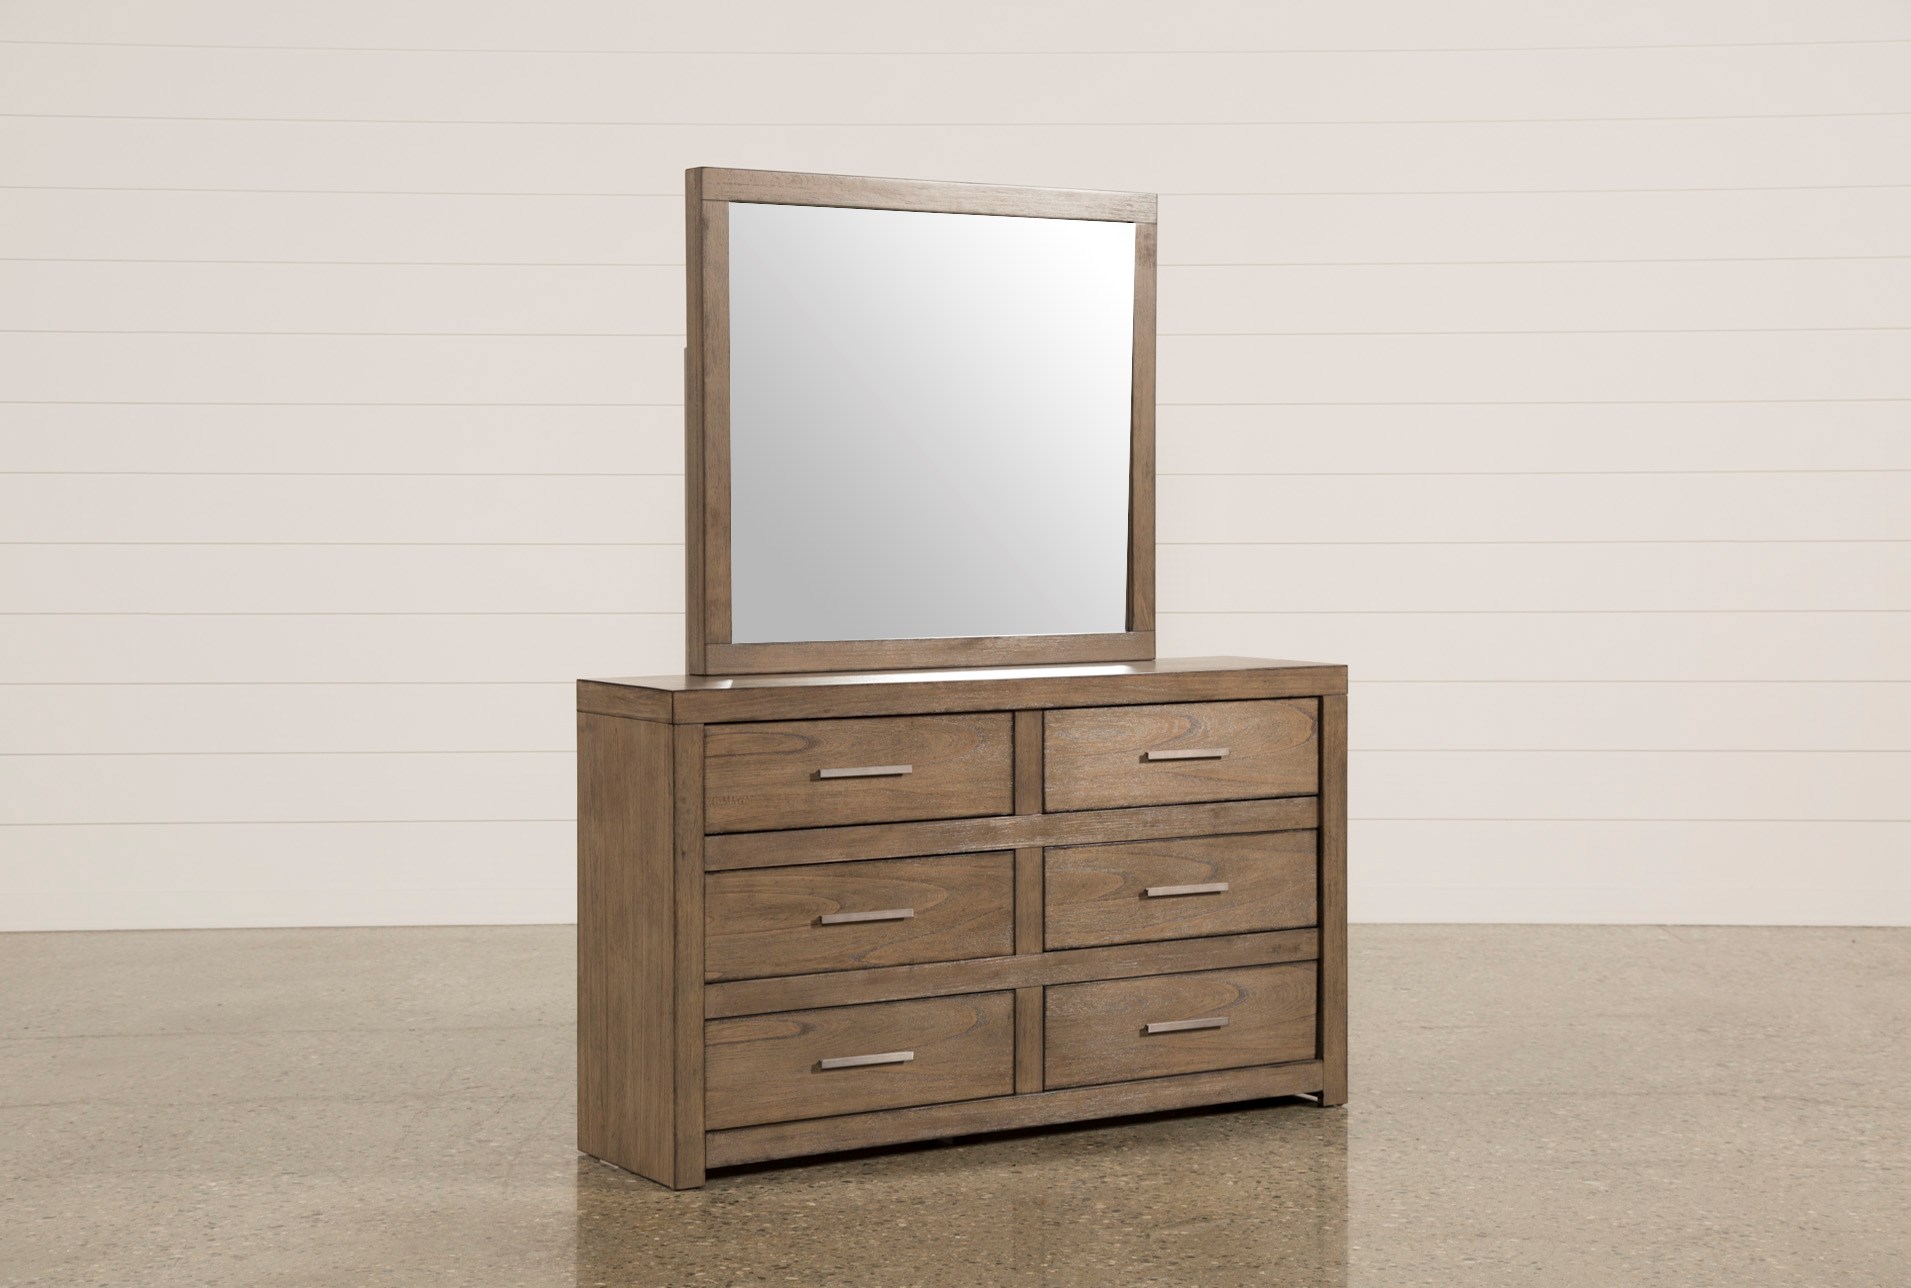 What Do You Call A Dresser With A Mirror